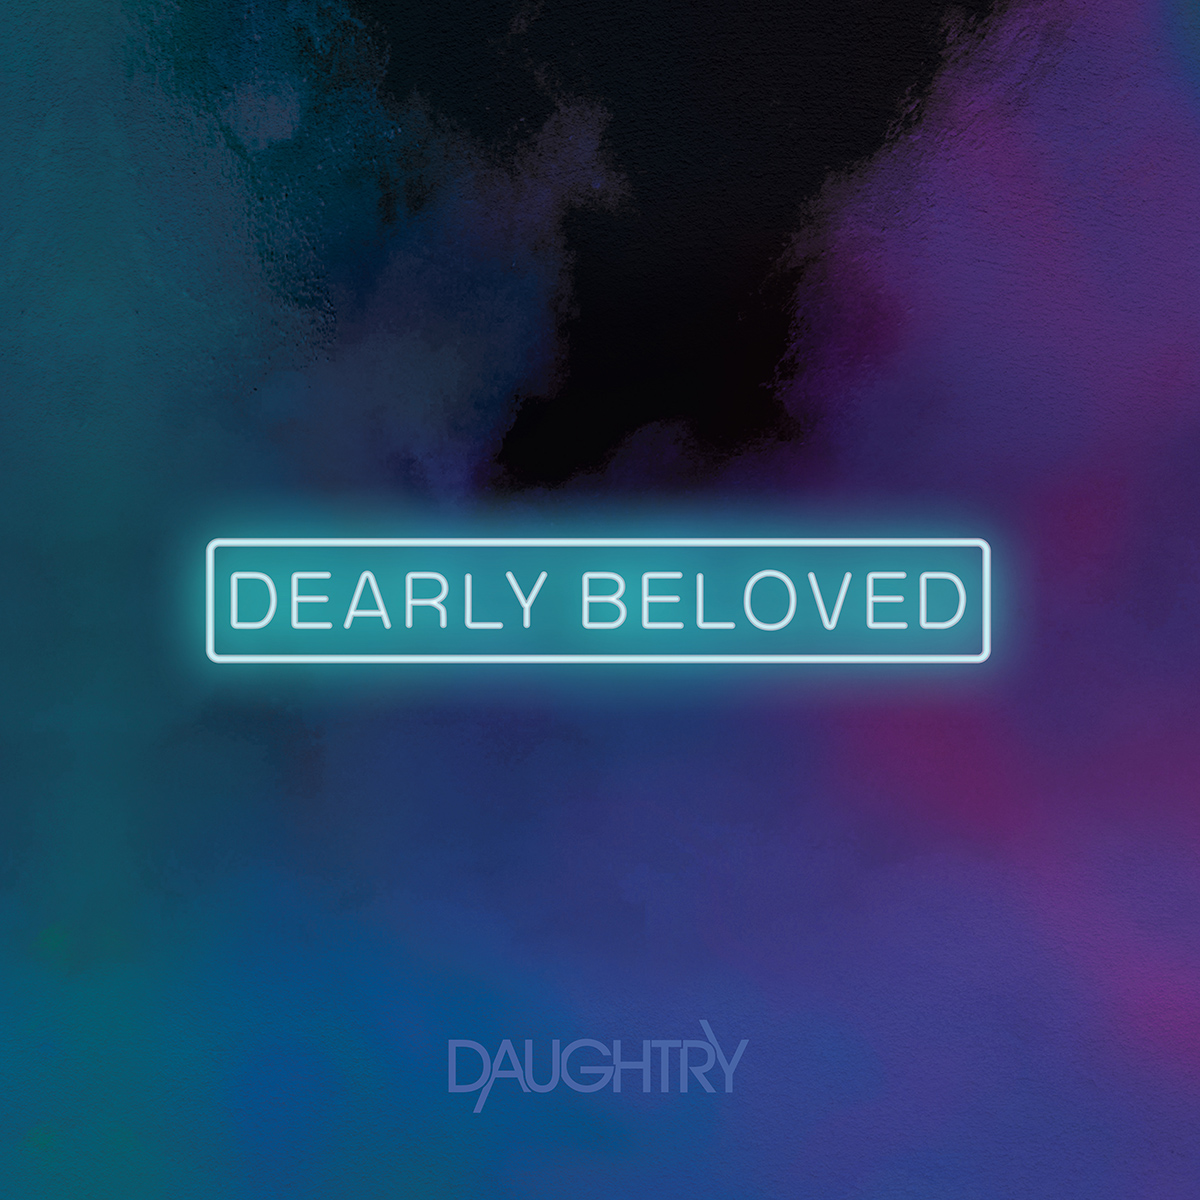 Daughtry - Dearly Beloved album